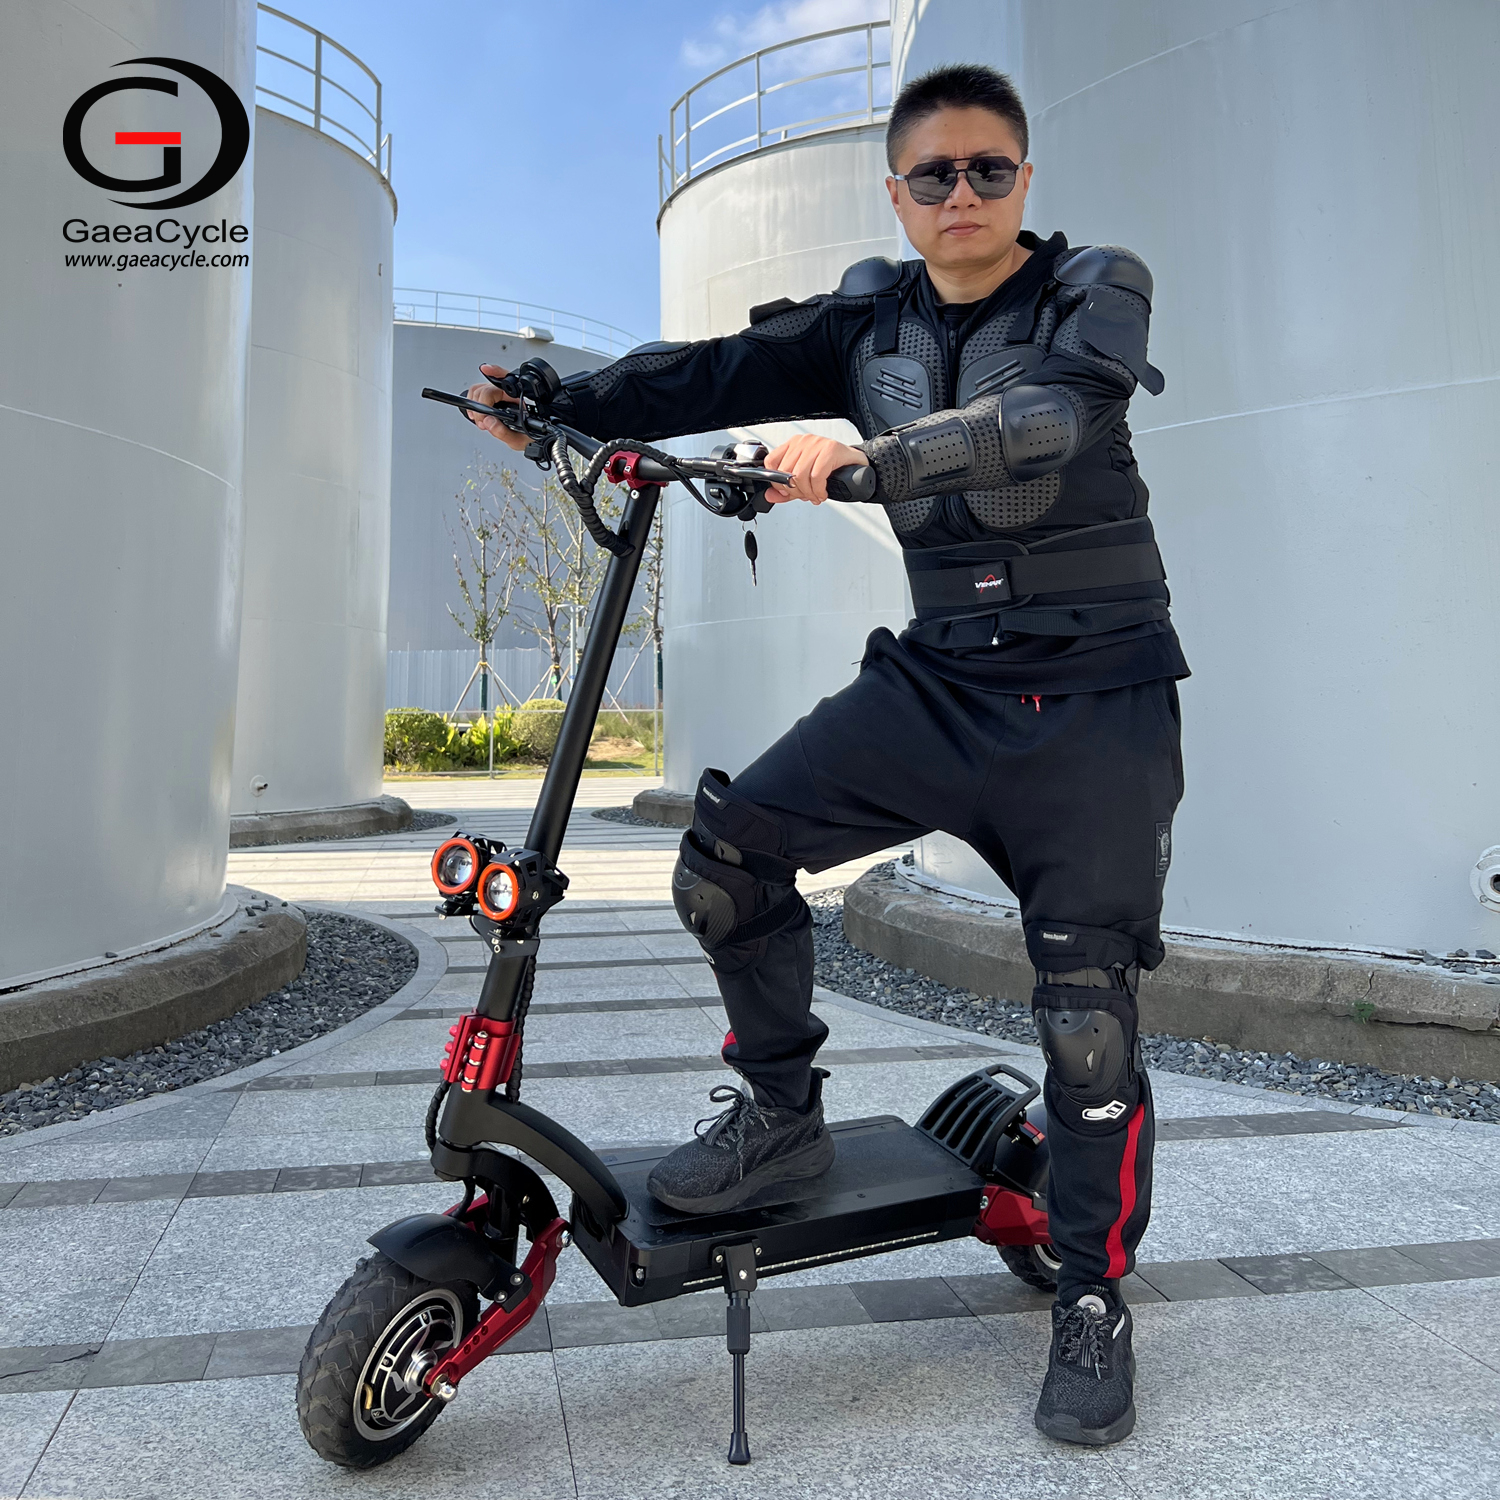 Cheap Fast Folding Electric Scooter Adult, Dual Motor 1600W, 10 Inch Off Road Tires, Oil Disc Brakes, 50Km Range, Dual 60v Controller